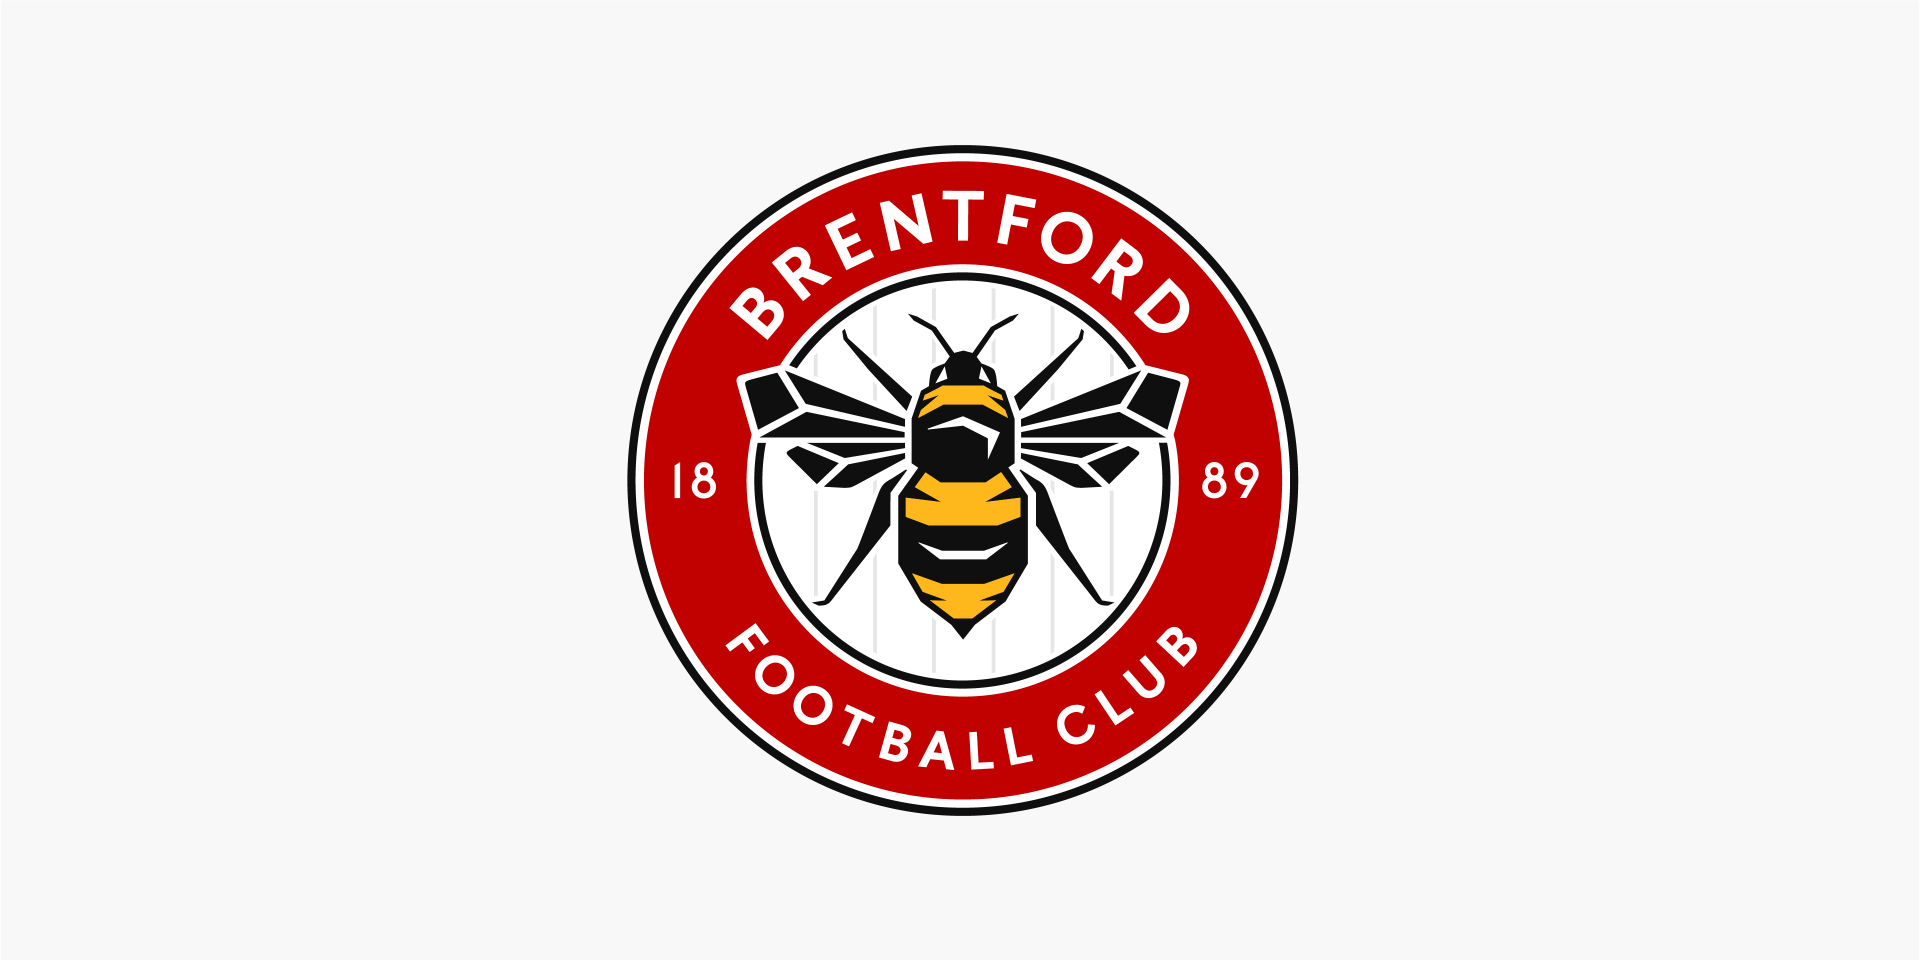 Brentford FC. Introducing our new club crest